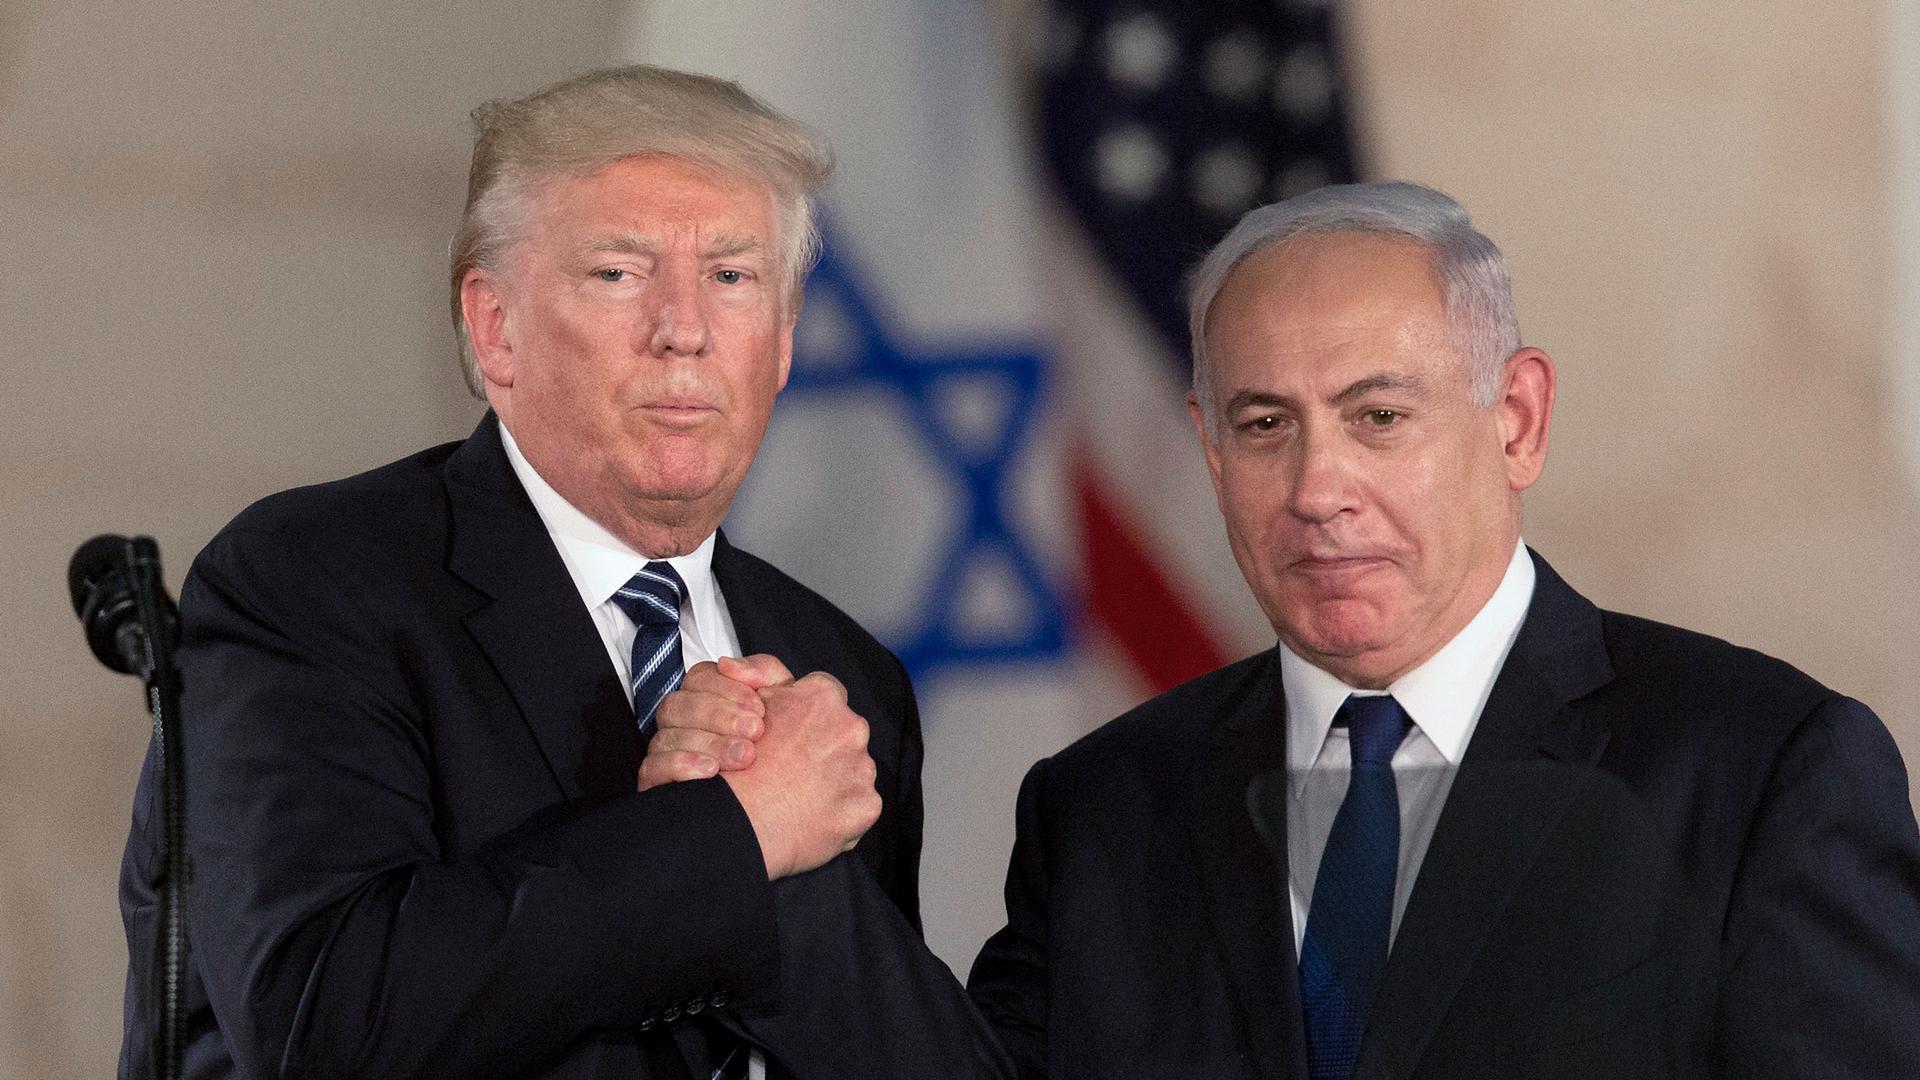 US President Donald Trump and Israeli Prime Minister Benjamin Netanyahu are shown both wearing dark suits and in a tight handshake.